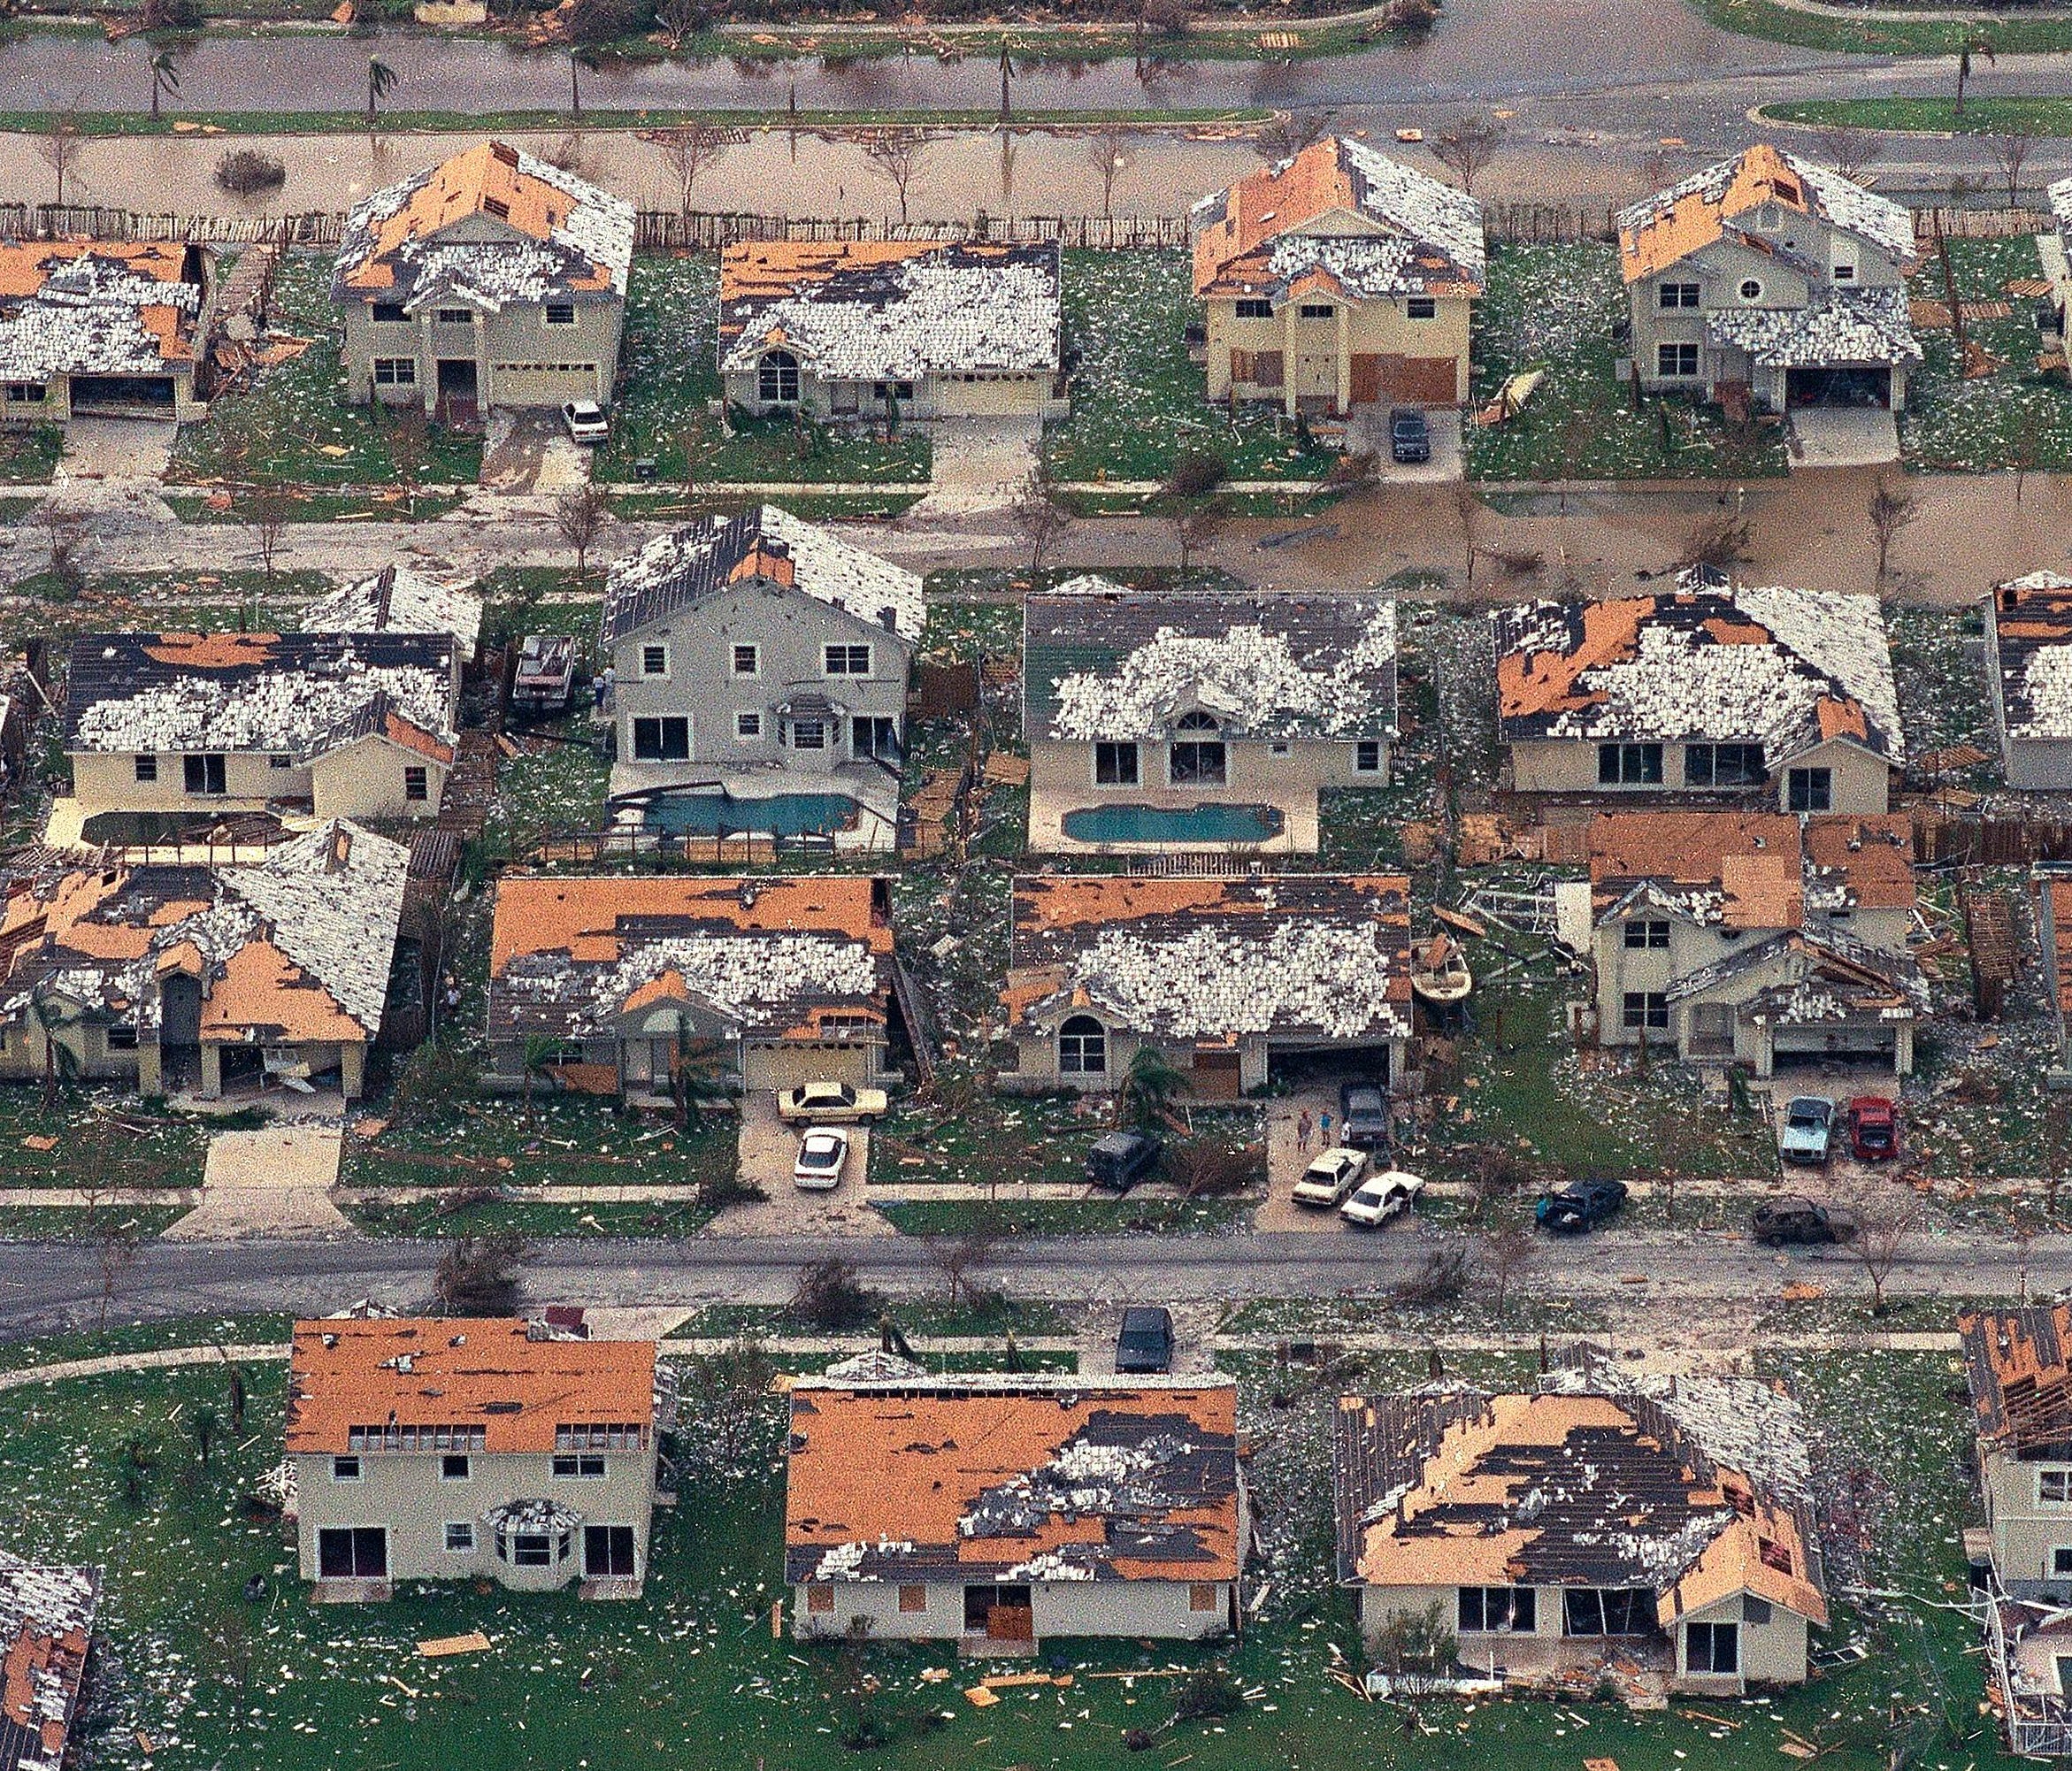 This Aug. 25, 1992 file photo shows rows of damaged houses between Homestead and Florida City, Fla.